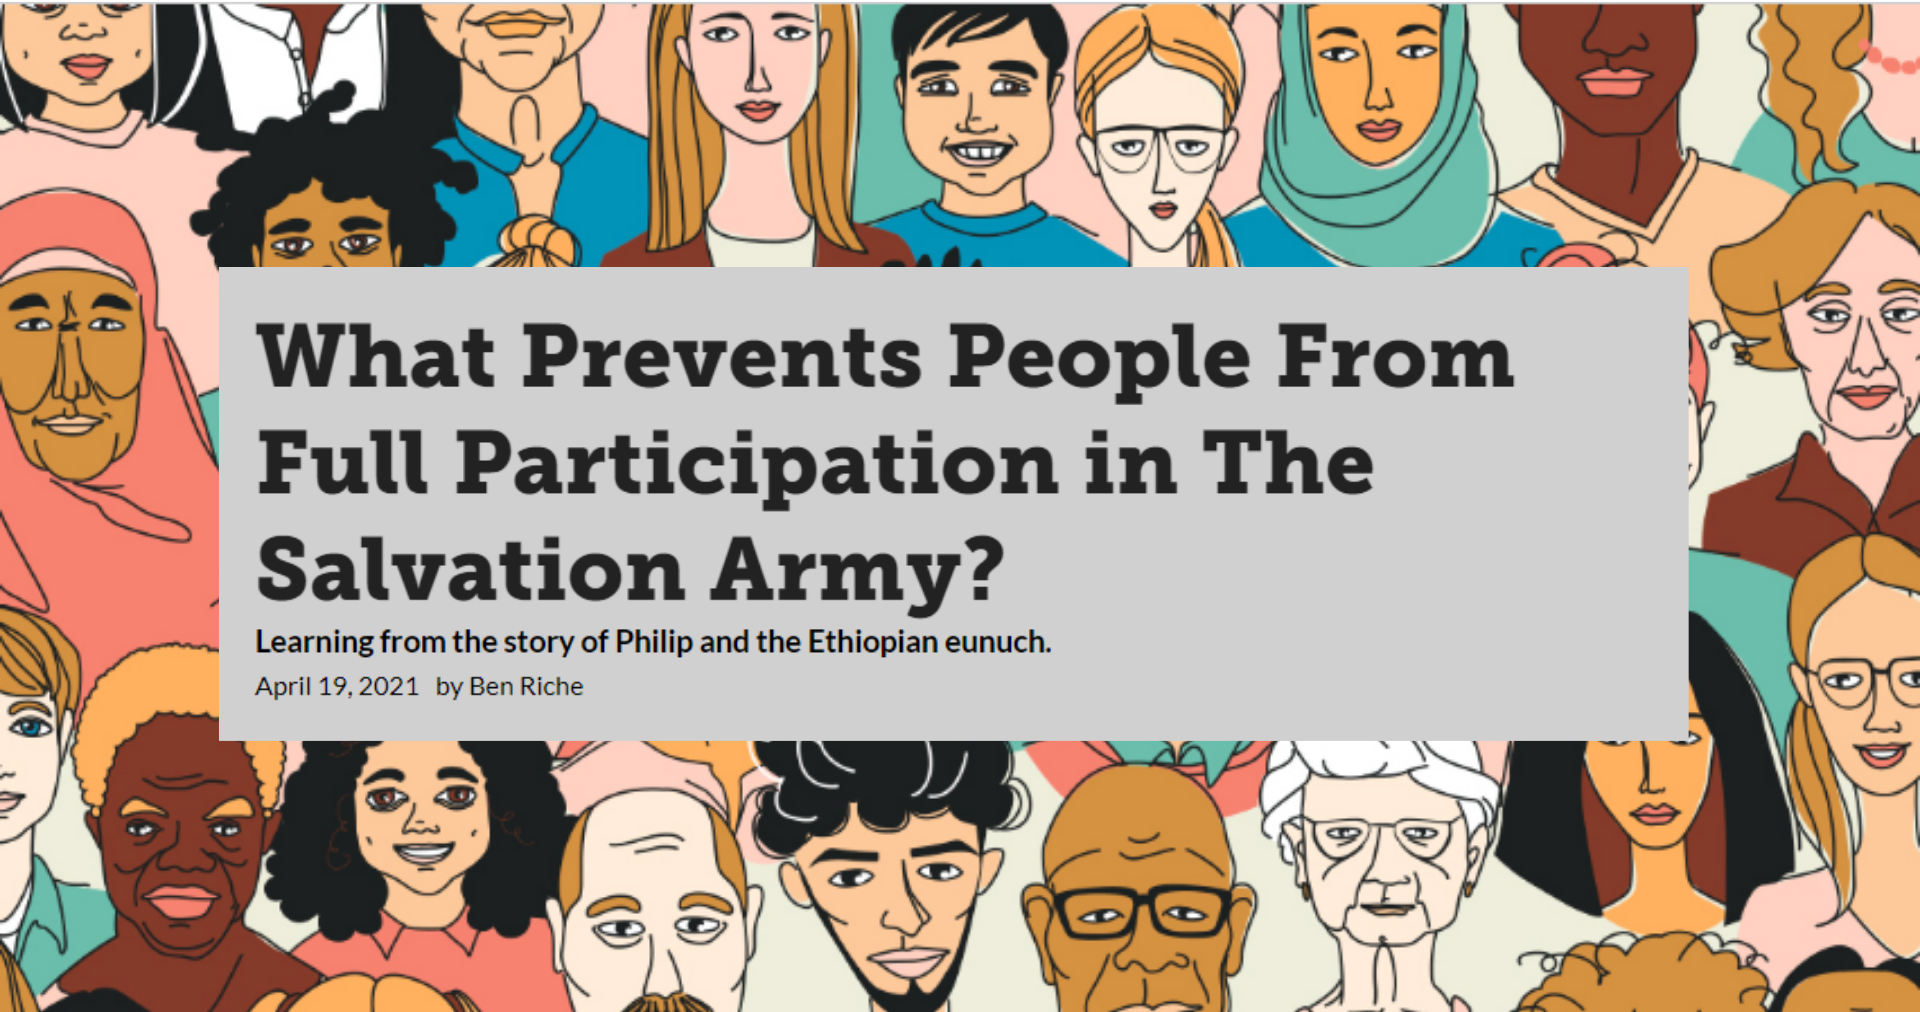 Linked to What Prevents People From Full Participation in The Salvation Army? article